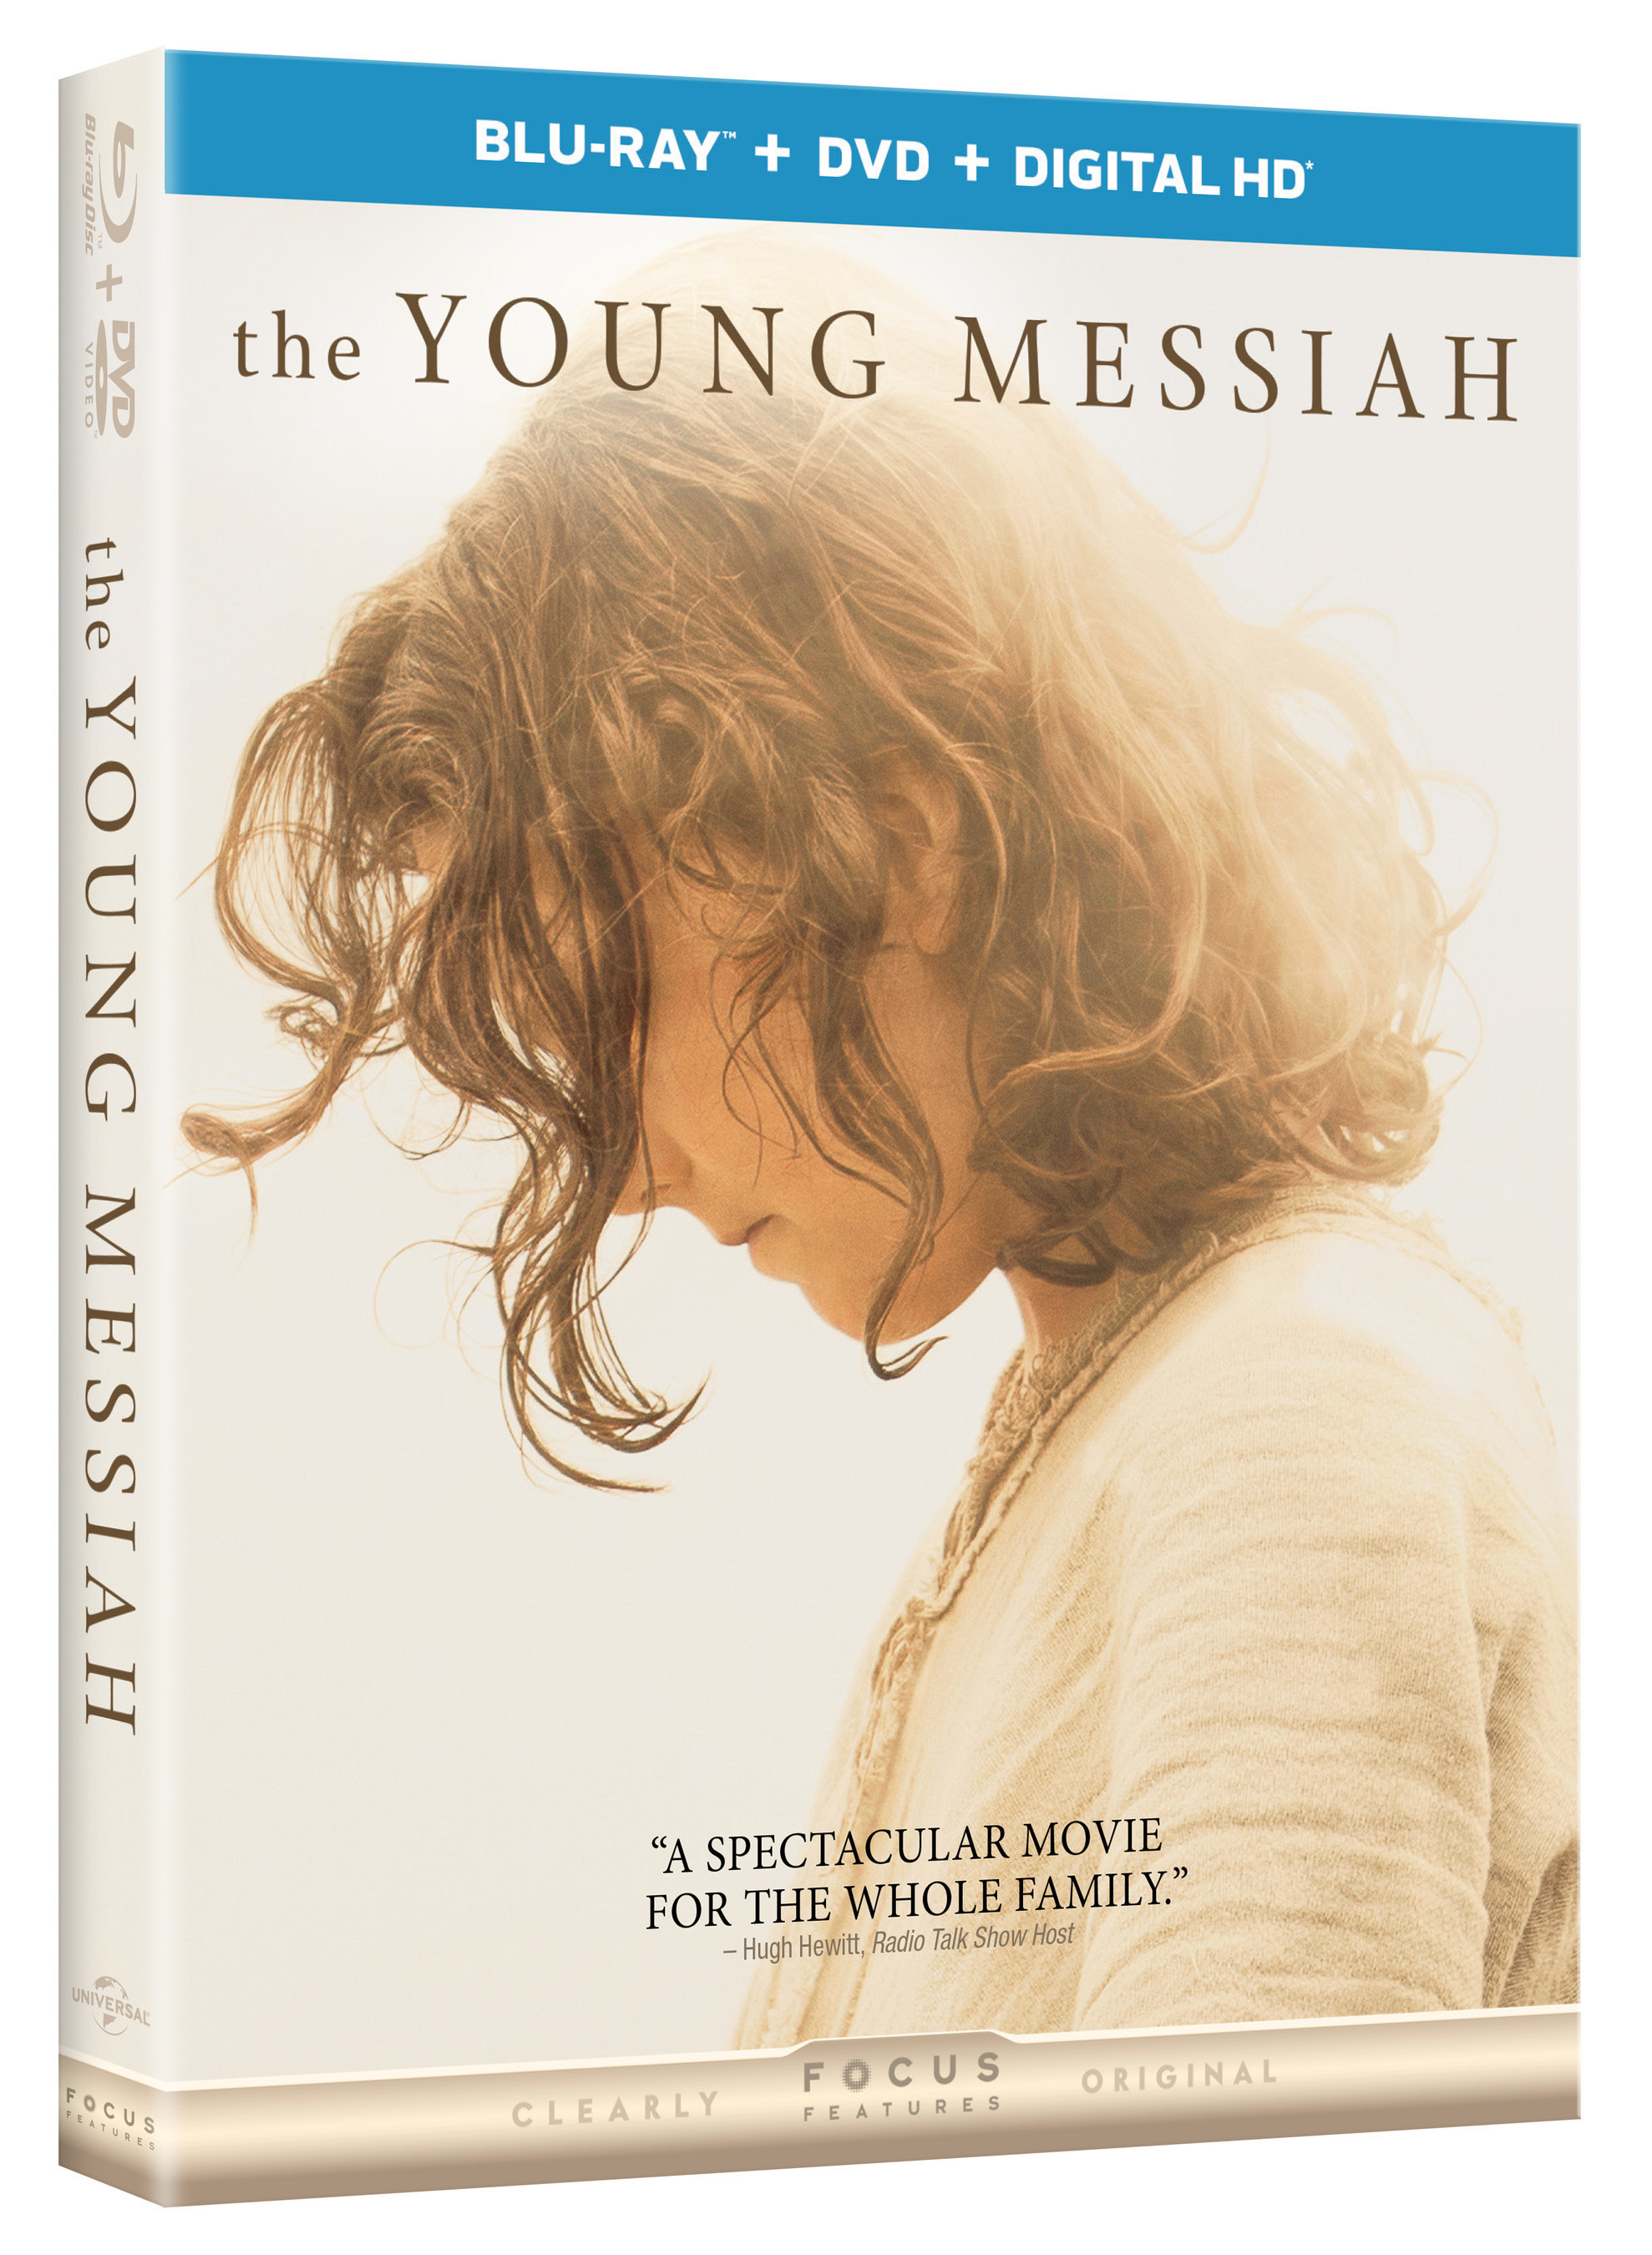 From Universal Pictures Home Entertainment: The Young Messiah